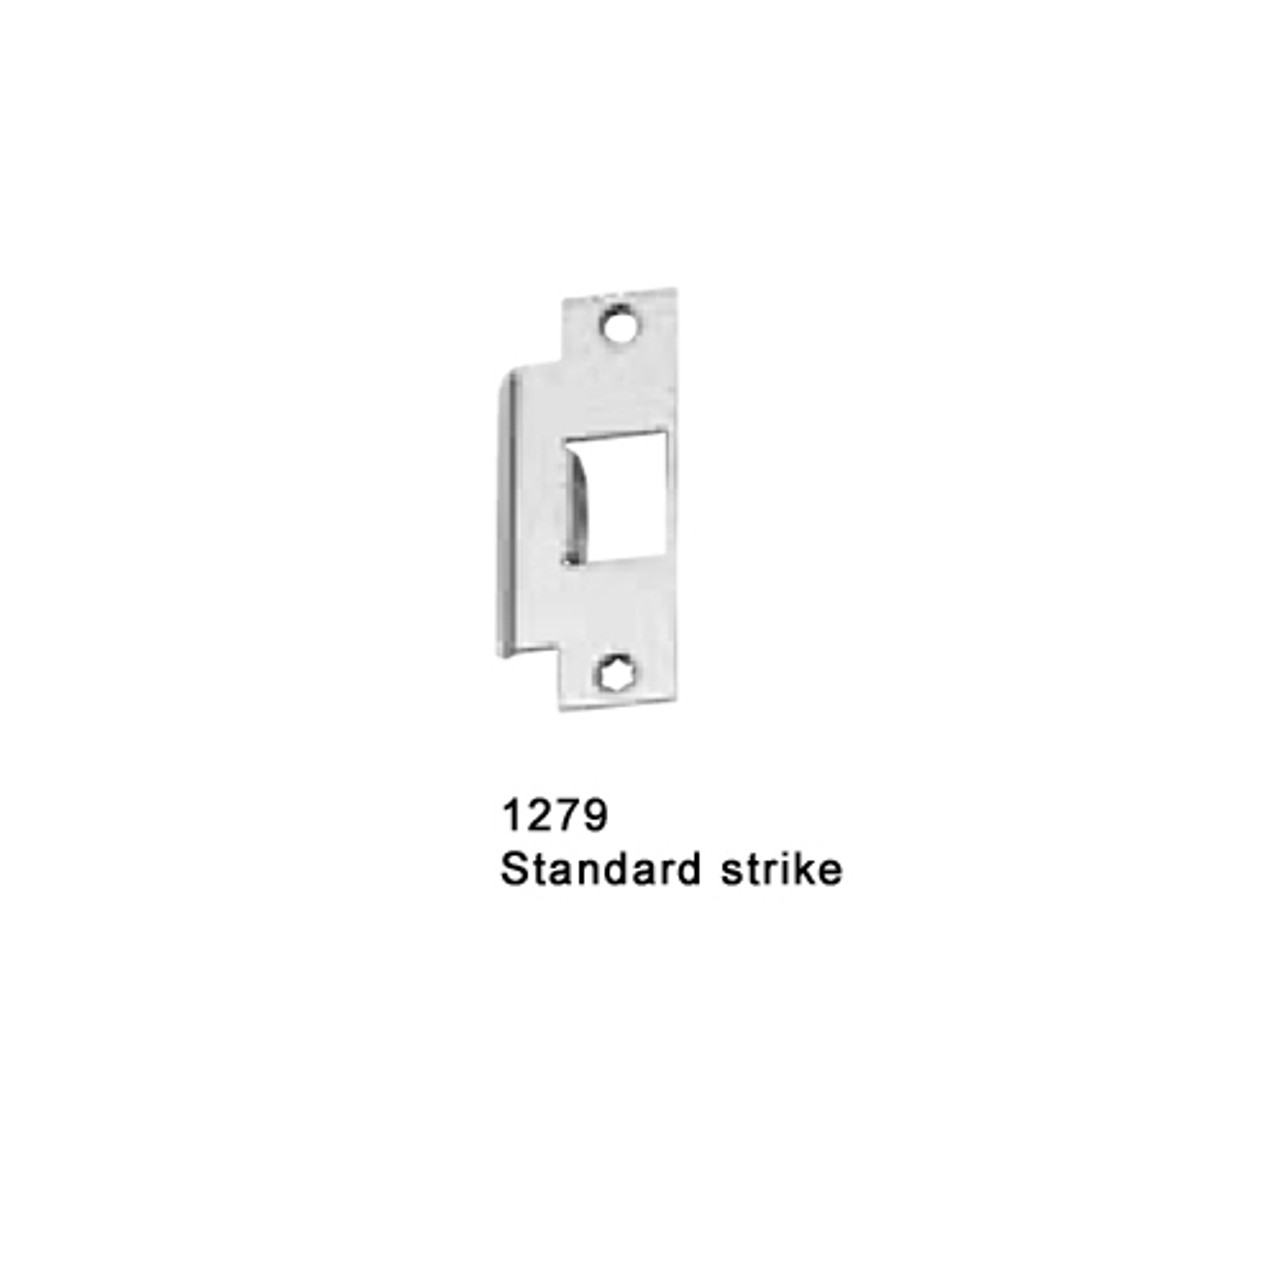 F-25-M-DT-US28-3-LHR Falcon 25 Series Fire Rated Mortise Lock Devices with 512DT Dummy Trim in Anodized Aluminum